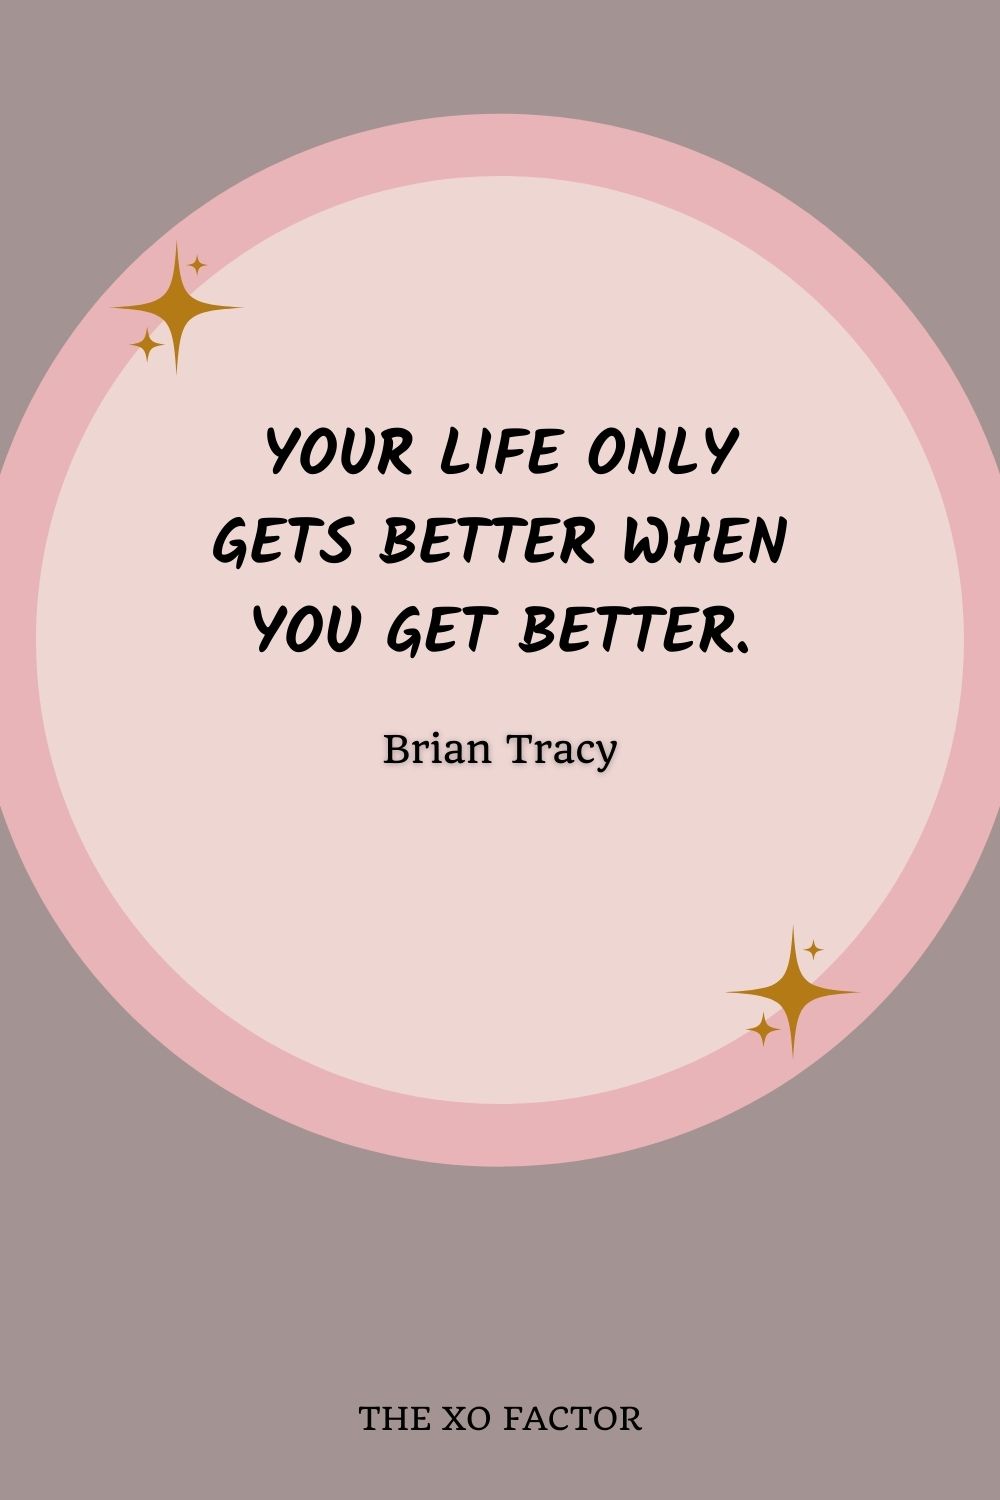 Your life only gets better when you get better.”- Brian Tracy